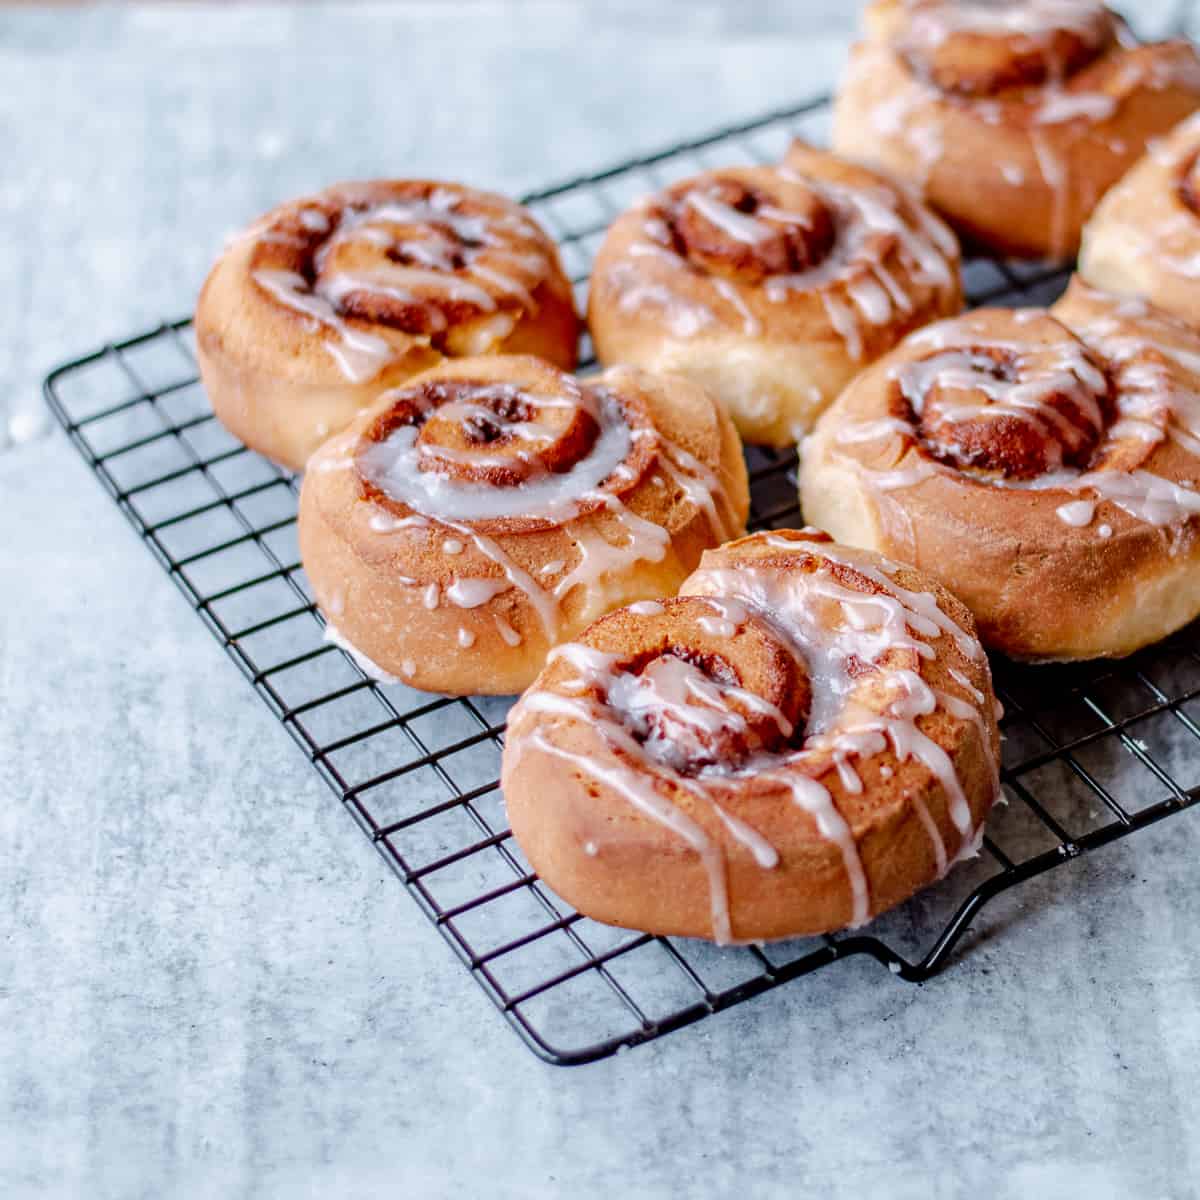 Homemade Cinnamon Rolls drizzled with white icing